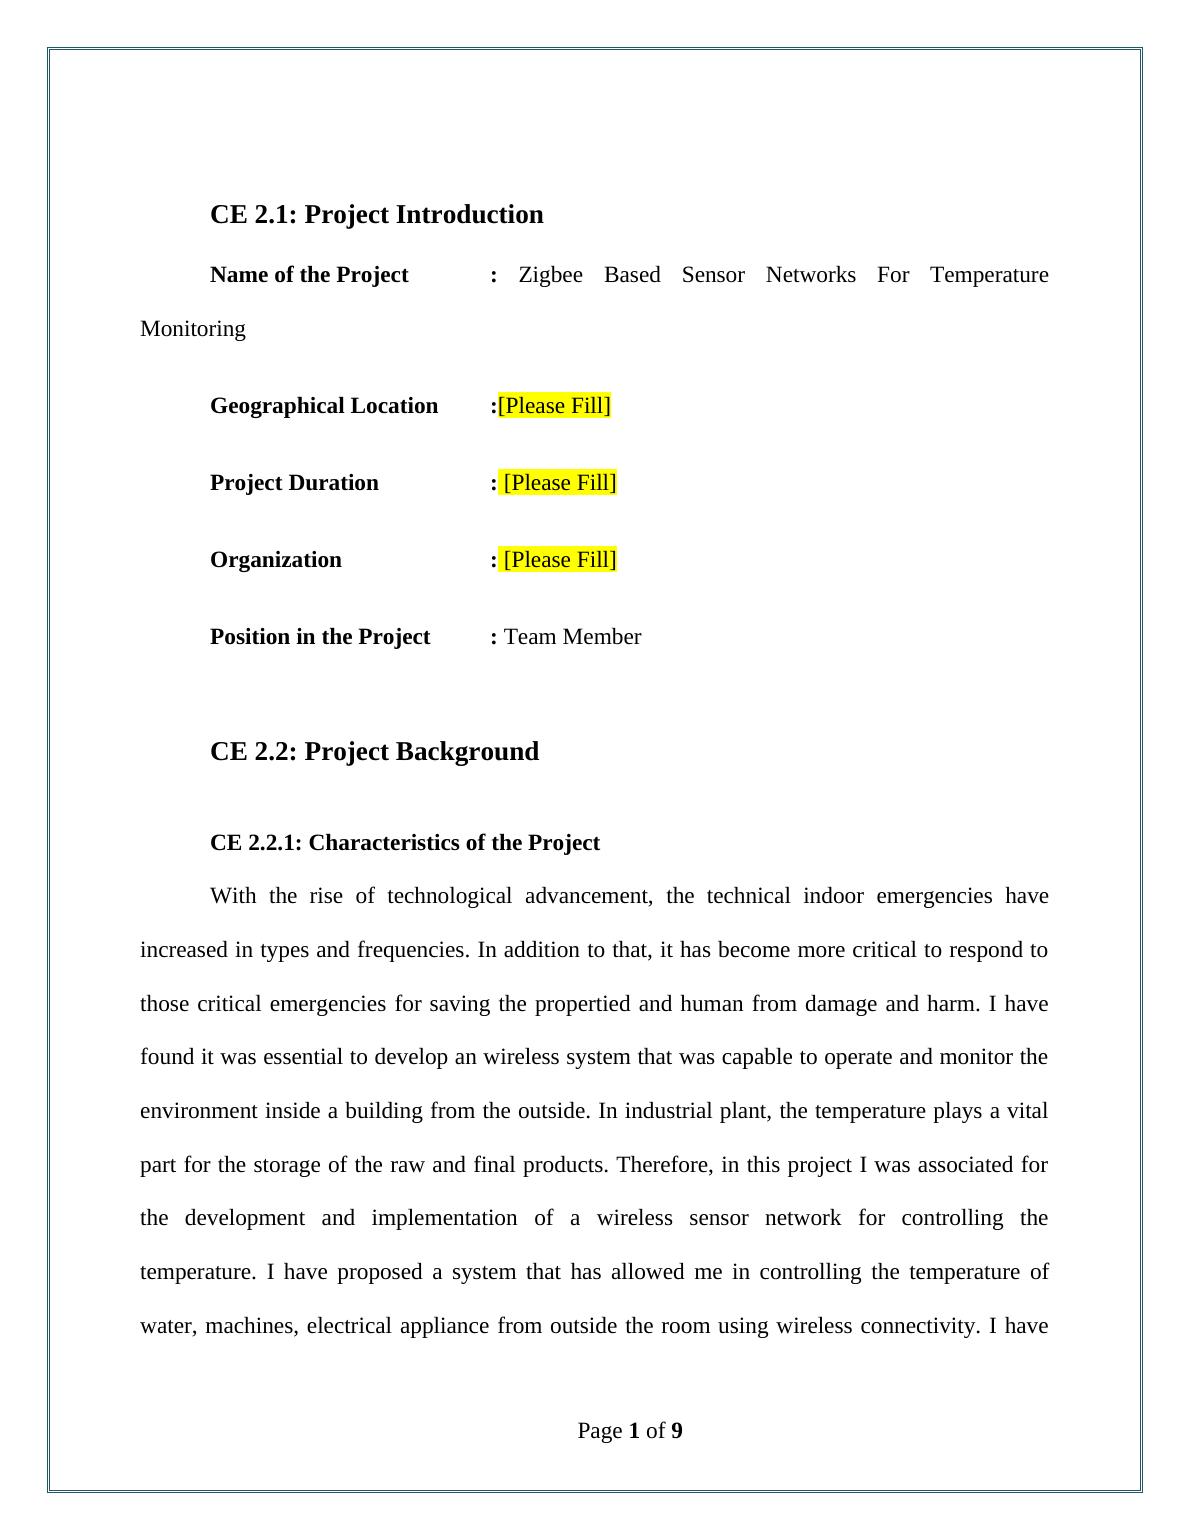 Competency Demonstration Report  - Zigbee Based Sensor Networks For Temperature Monitoring_2